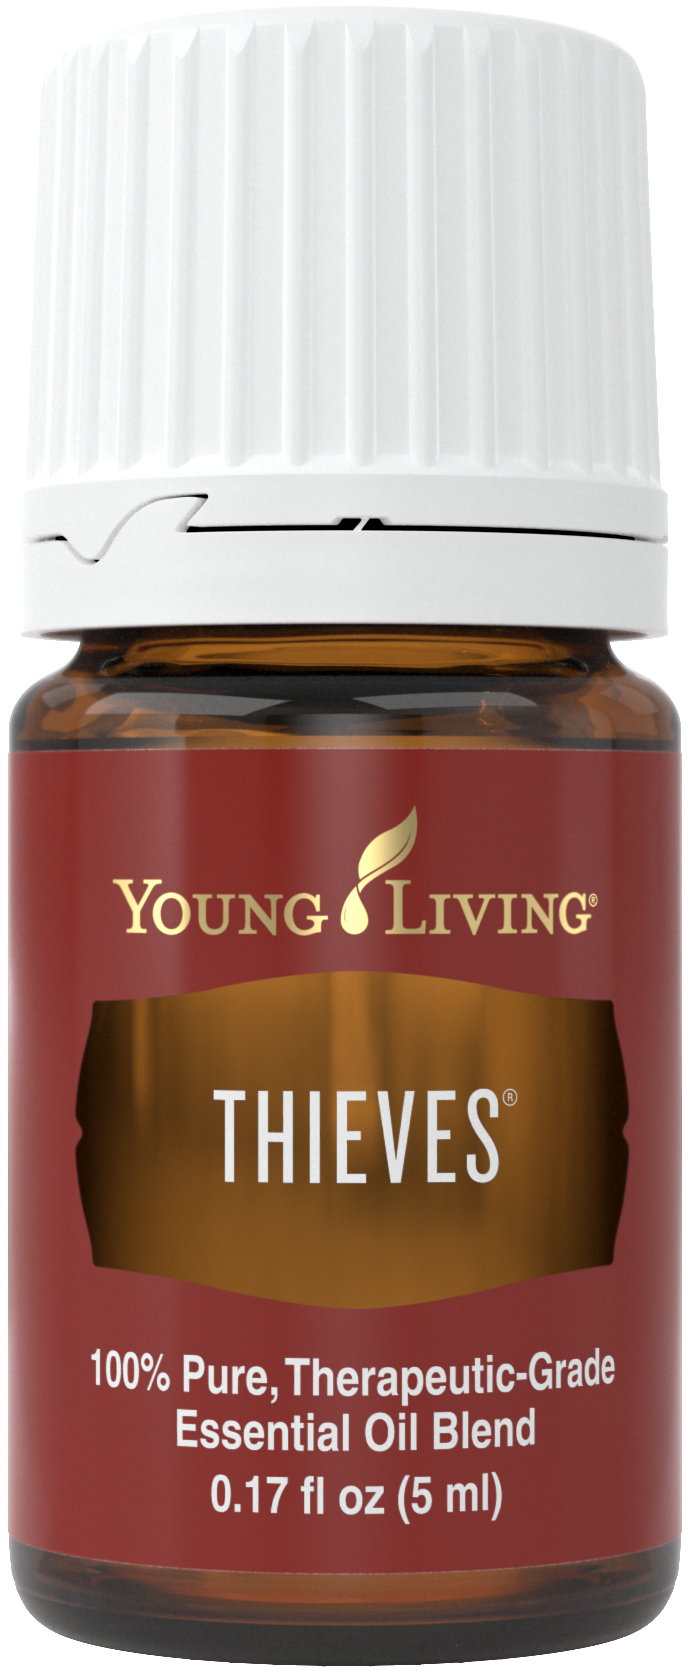 Thieves 5ml Silo.png